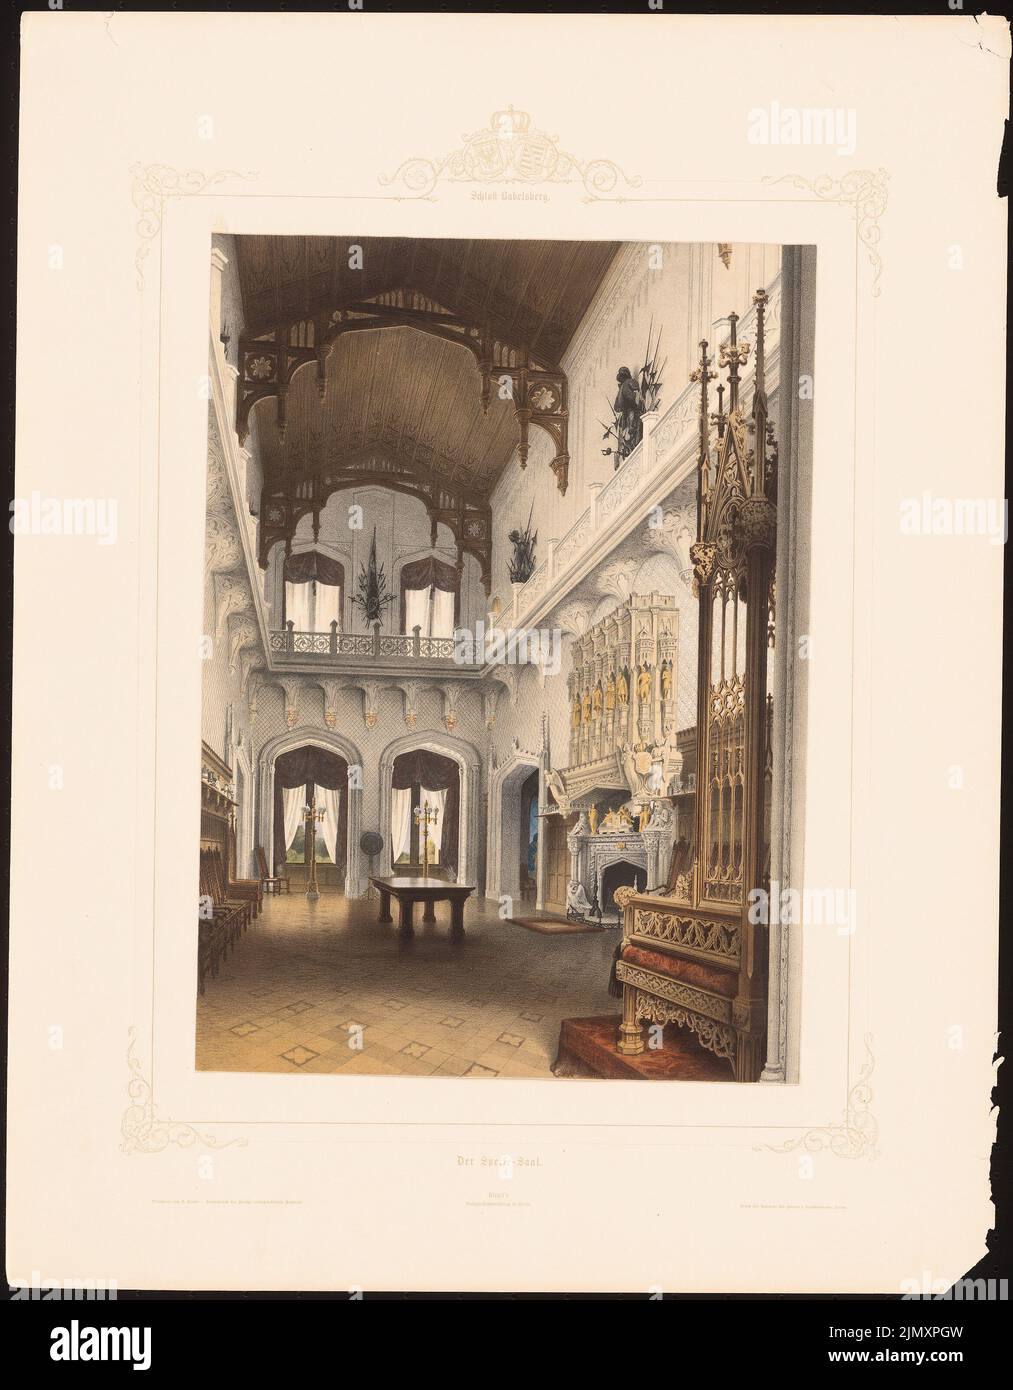 Graeb Carl (1816-1884), Babelsberg Castle, Potsdam (1860-1860): Perspective interior view dining room. Lithograph colored on paper, 58.5 x 45.7 cm (including scan edges) Stock Photo